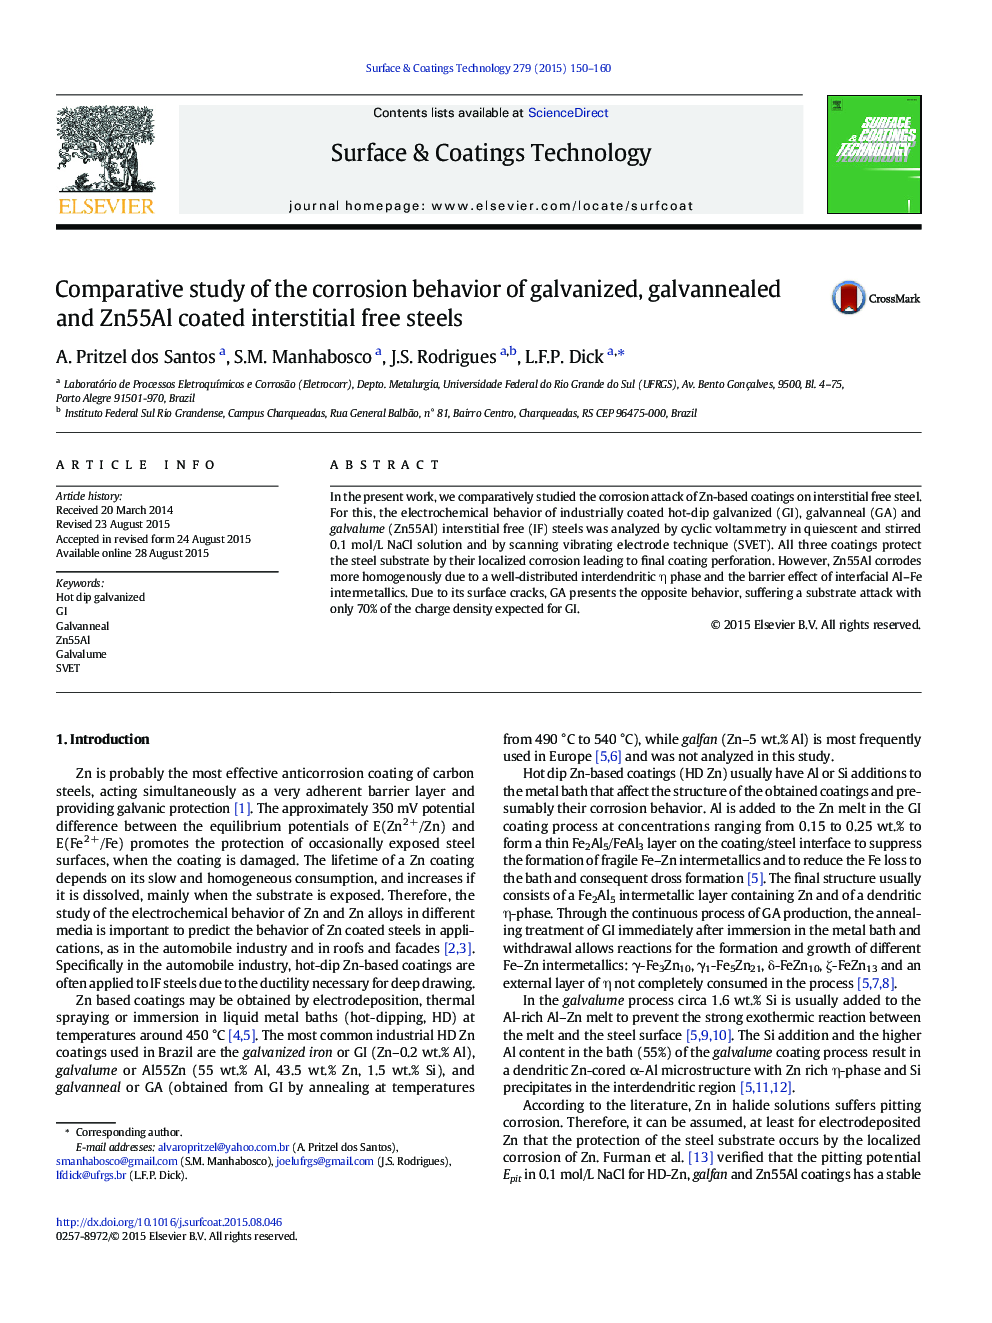 Comparative study of the corrosion behavior of galvanized, galvannealed and Zn55Al coated interstitial free steels